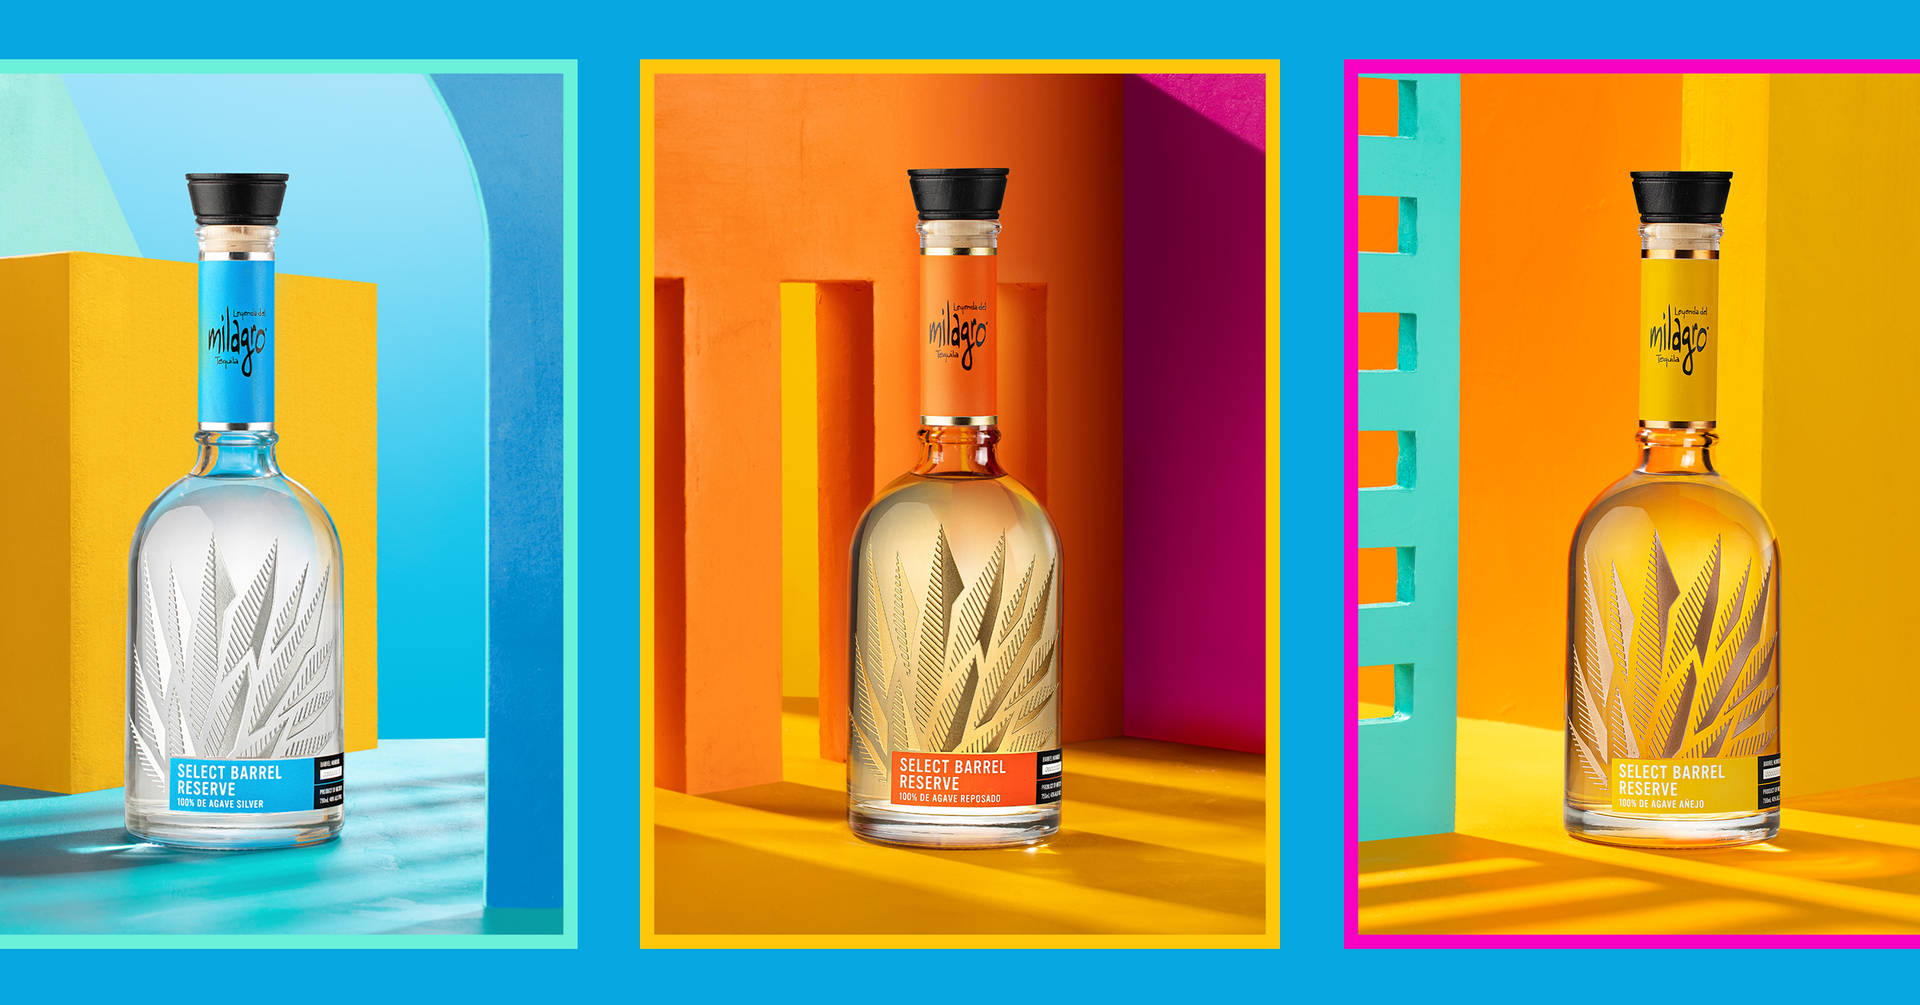 Milagro Brand Select Tequilas Wallpaper